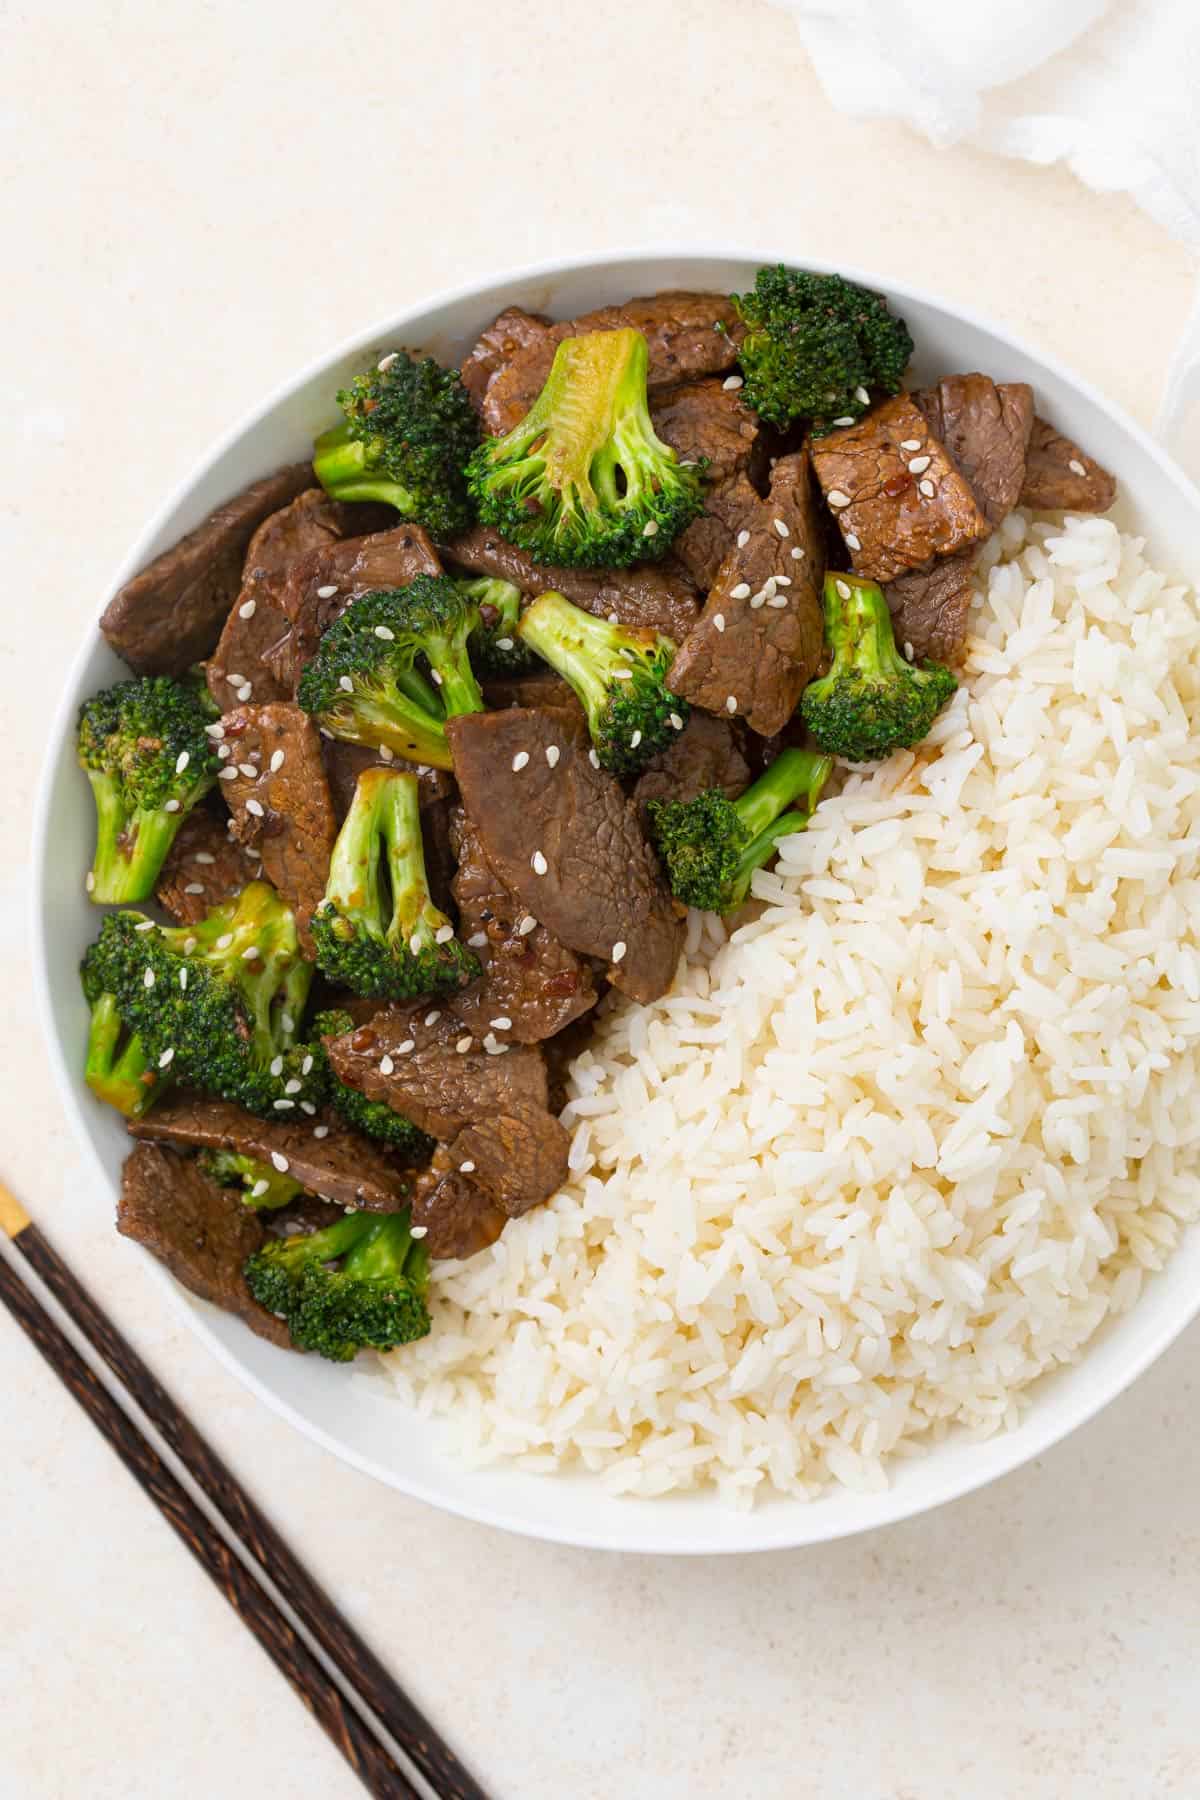 Beef and broccoli in a bowl with white rice beside a set of chopsticks.